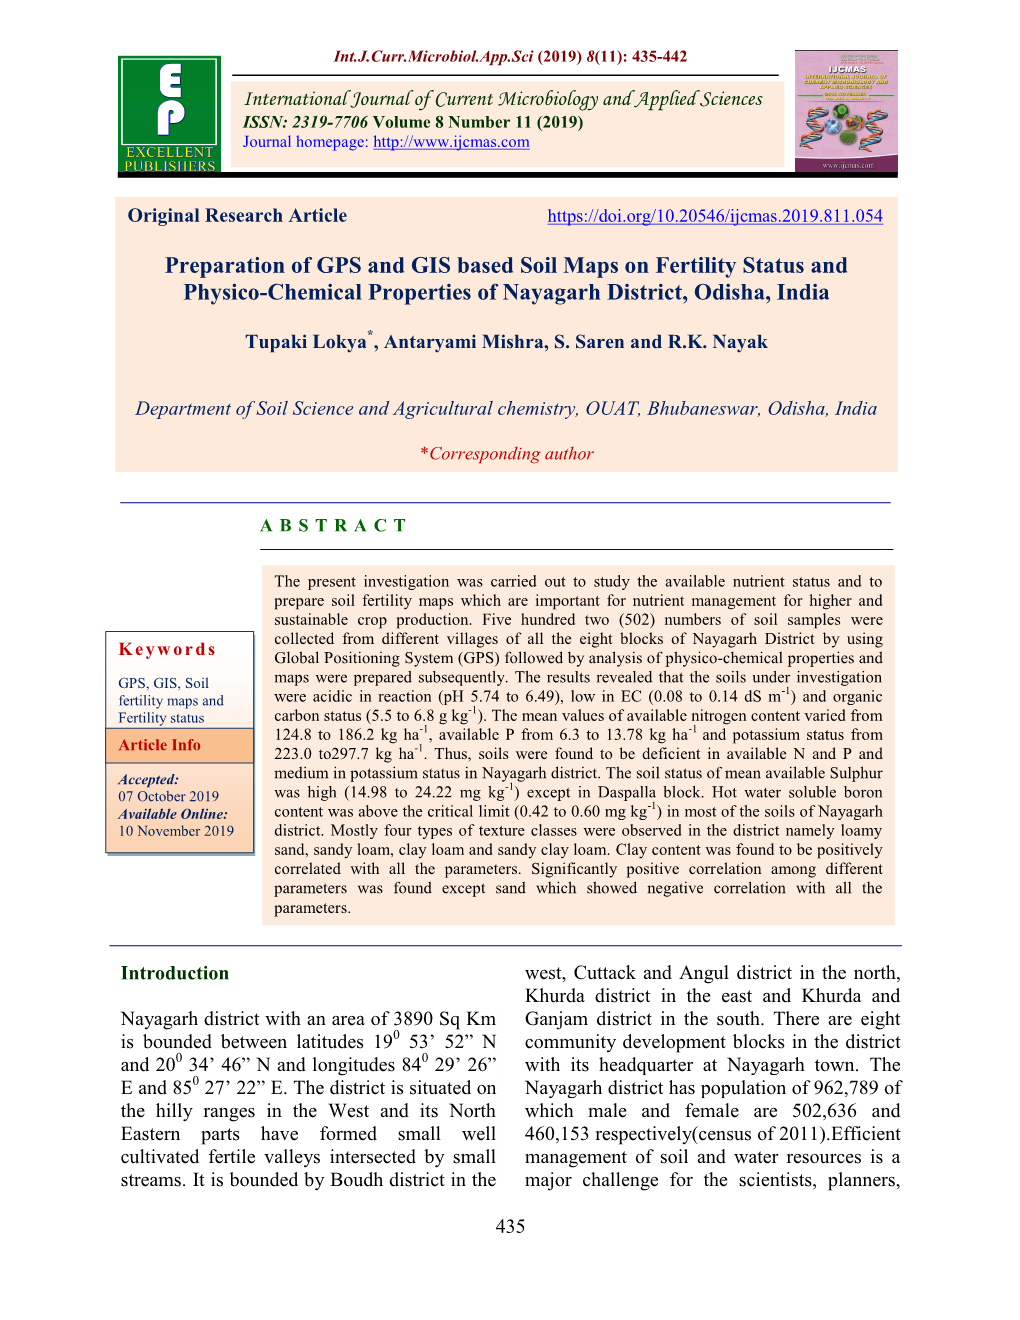 Preparation of GPS and GIS Based Soil Maps on Fertility Status and Physico-Chemical Properties of Nayagarh District, Odisha, India